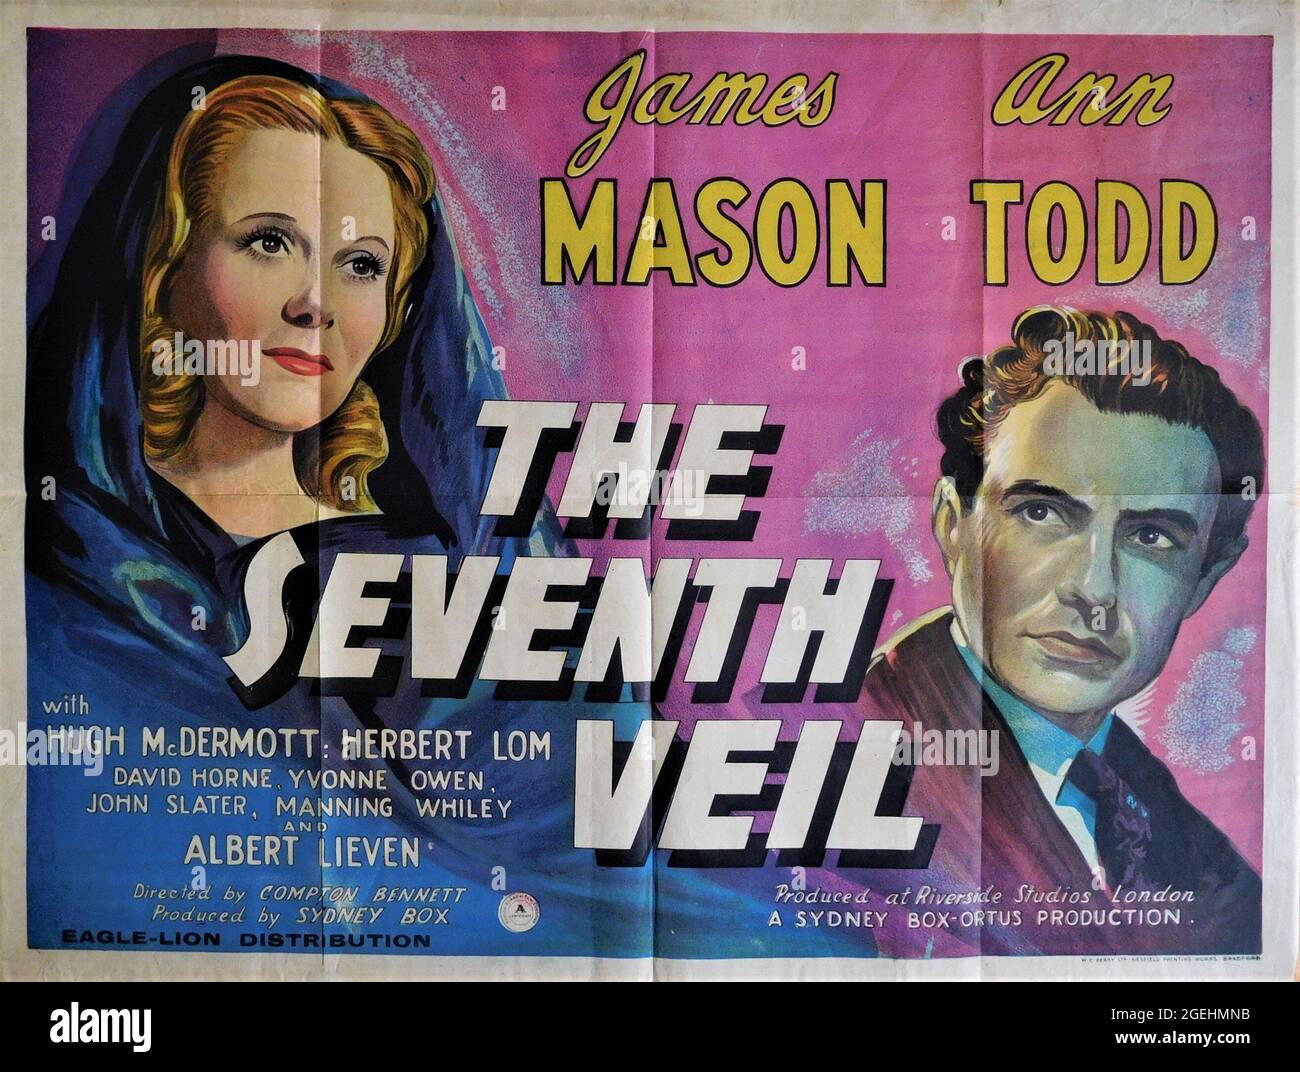 Original Release British Quad Poster for JAMES MASON and ANN TODD in THE SEVENTH VEIL 1945 director COMPTON BENNETT original story / screenplay Muriel and Sydney Box music Benjamin Frankel produced at Riverside Studios London Ortus Films / Sydney Box Productions / Eagle-Lion Distribution Stock Photo